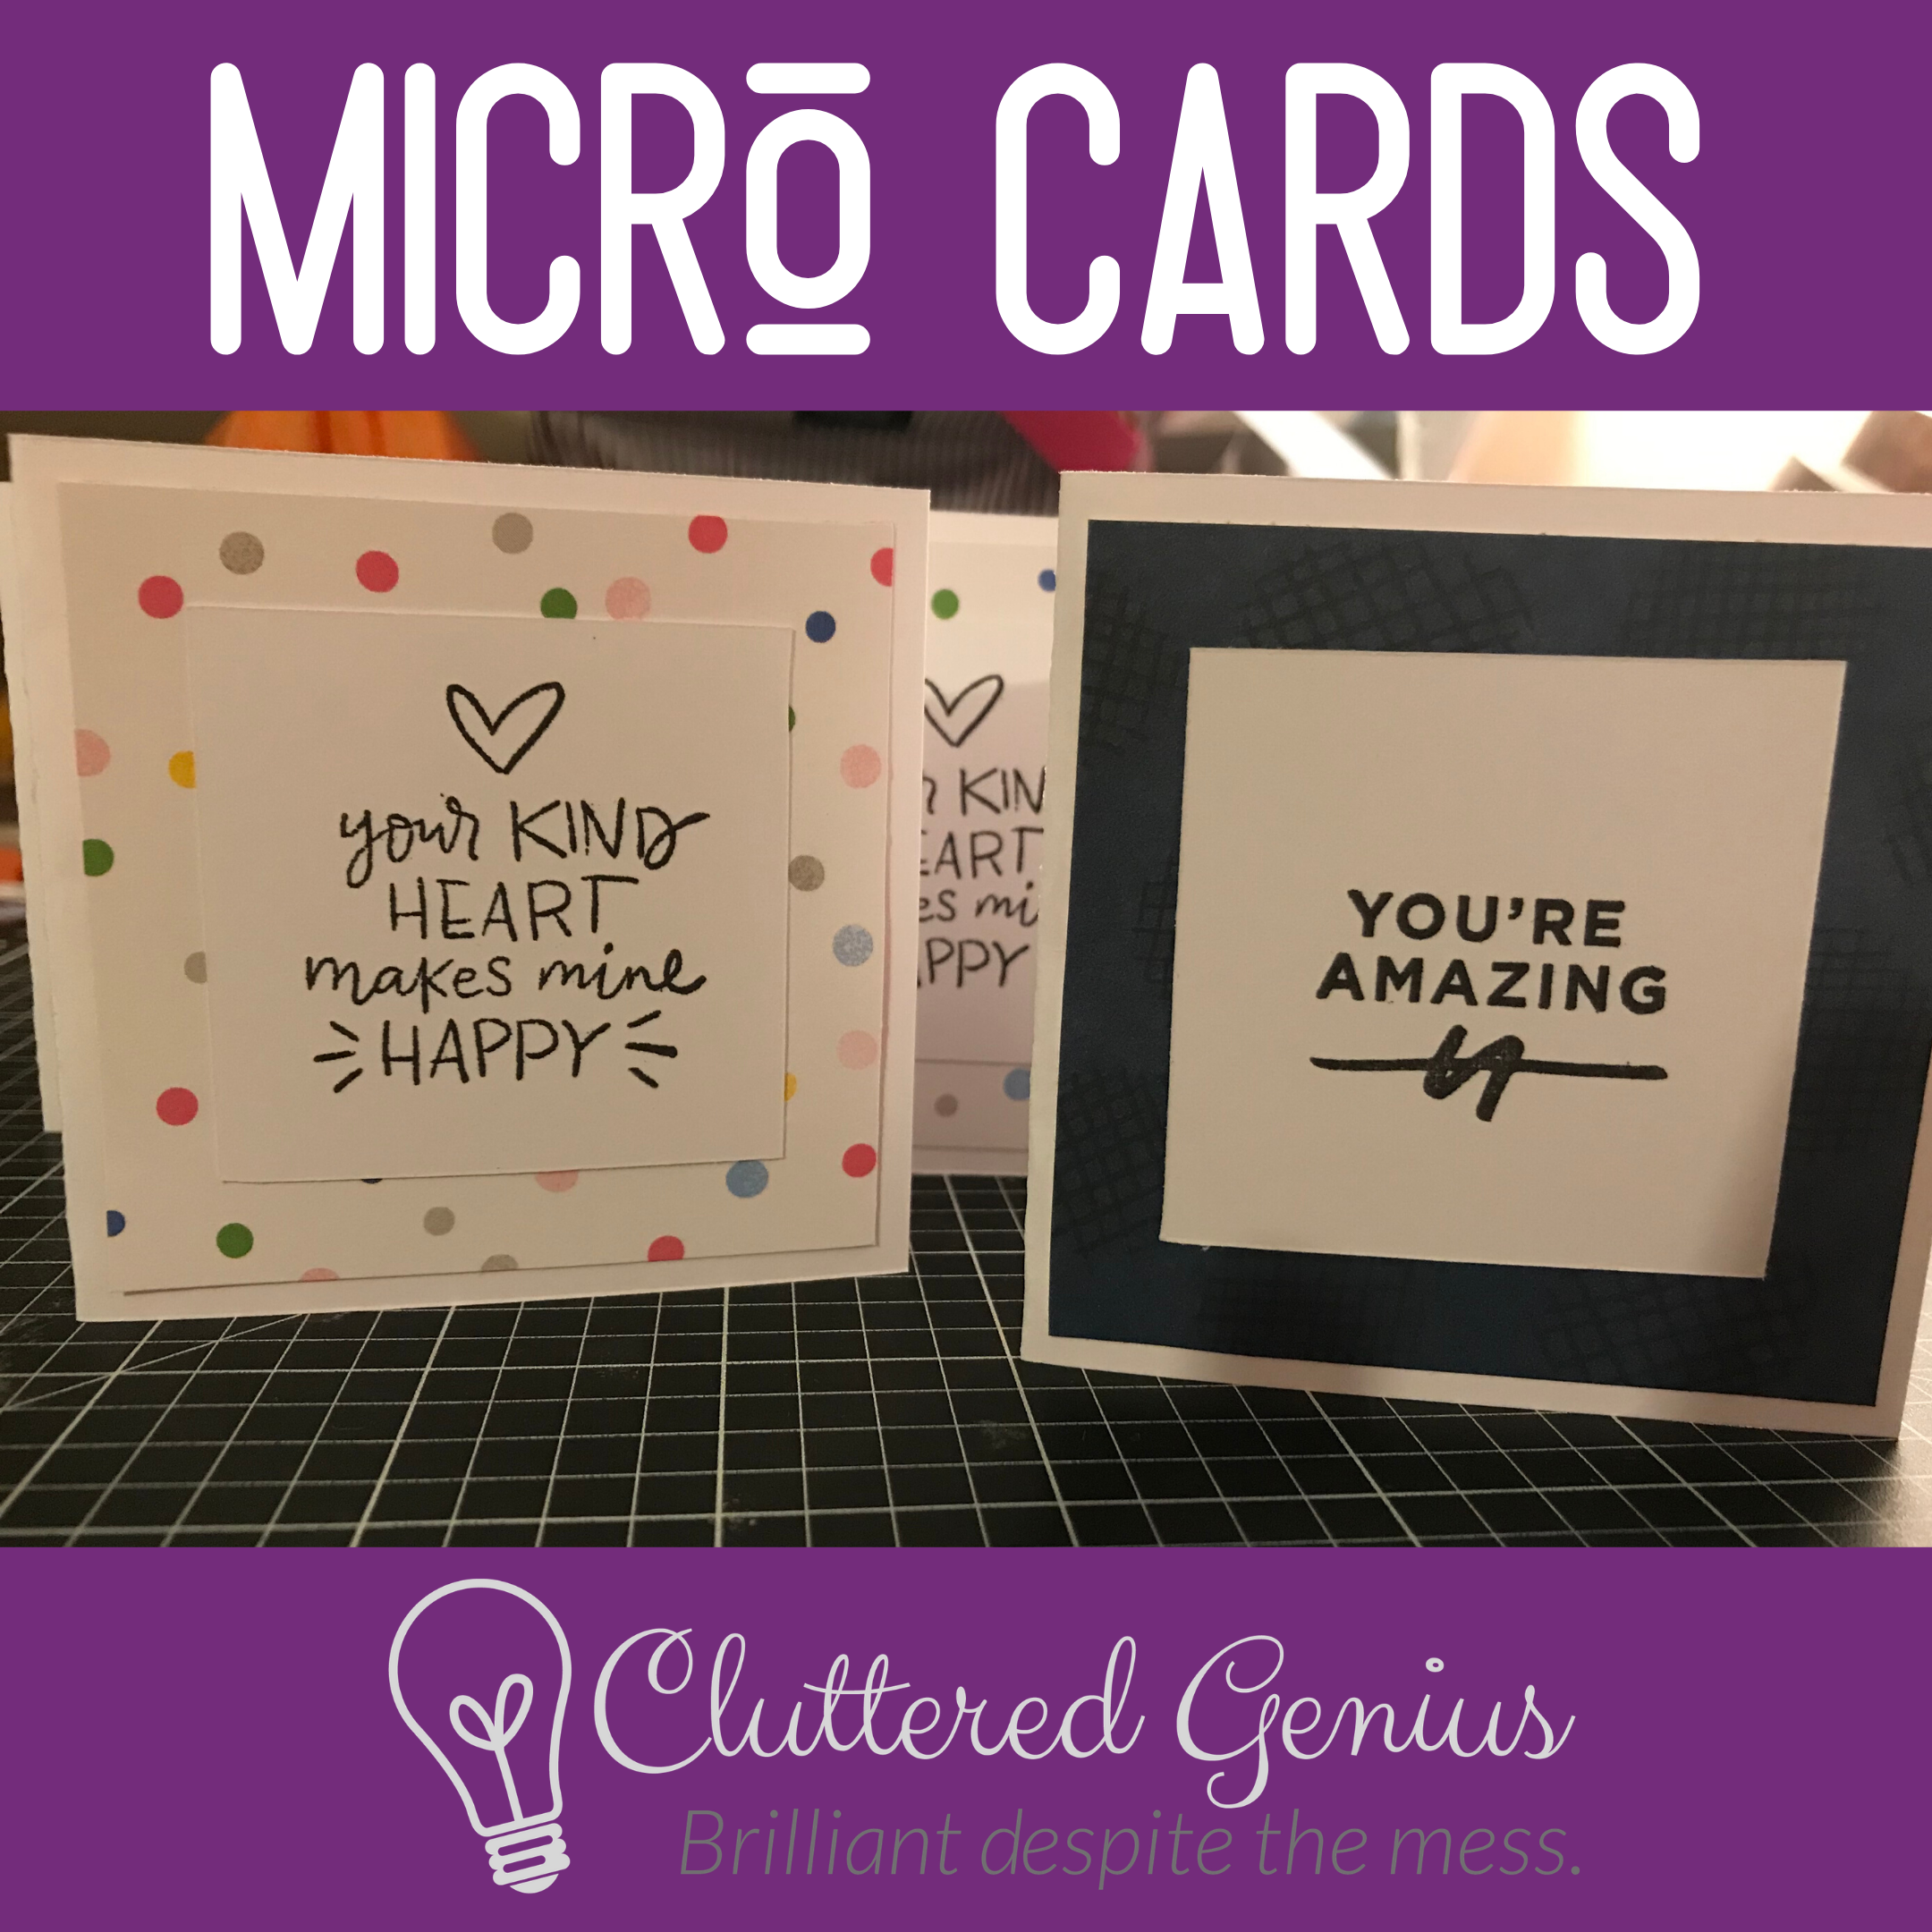 Micro Cards